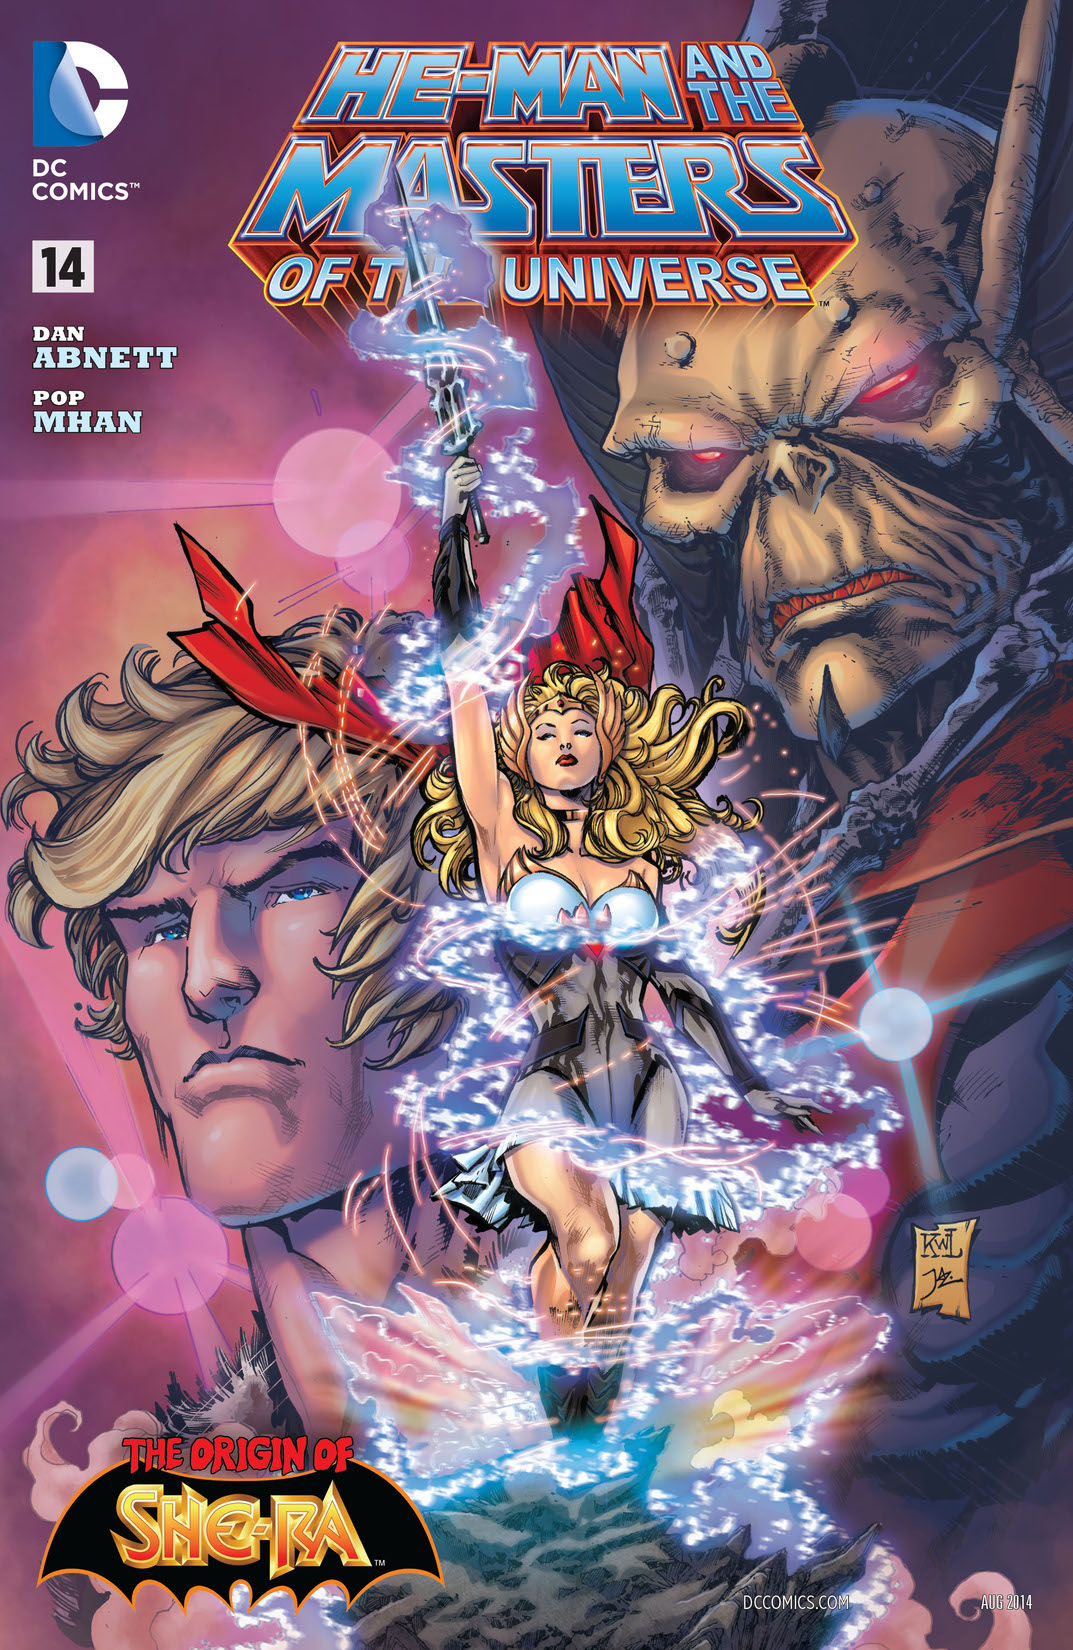 He-Man and the Masters of the Universe (2013-) #14 preview images